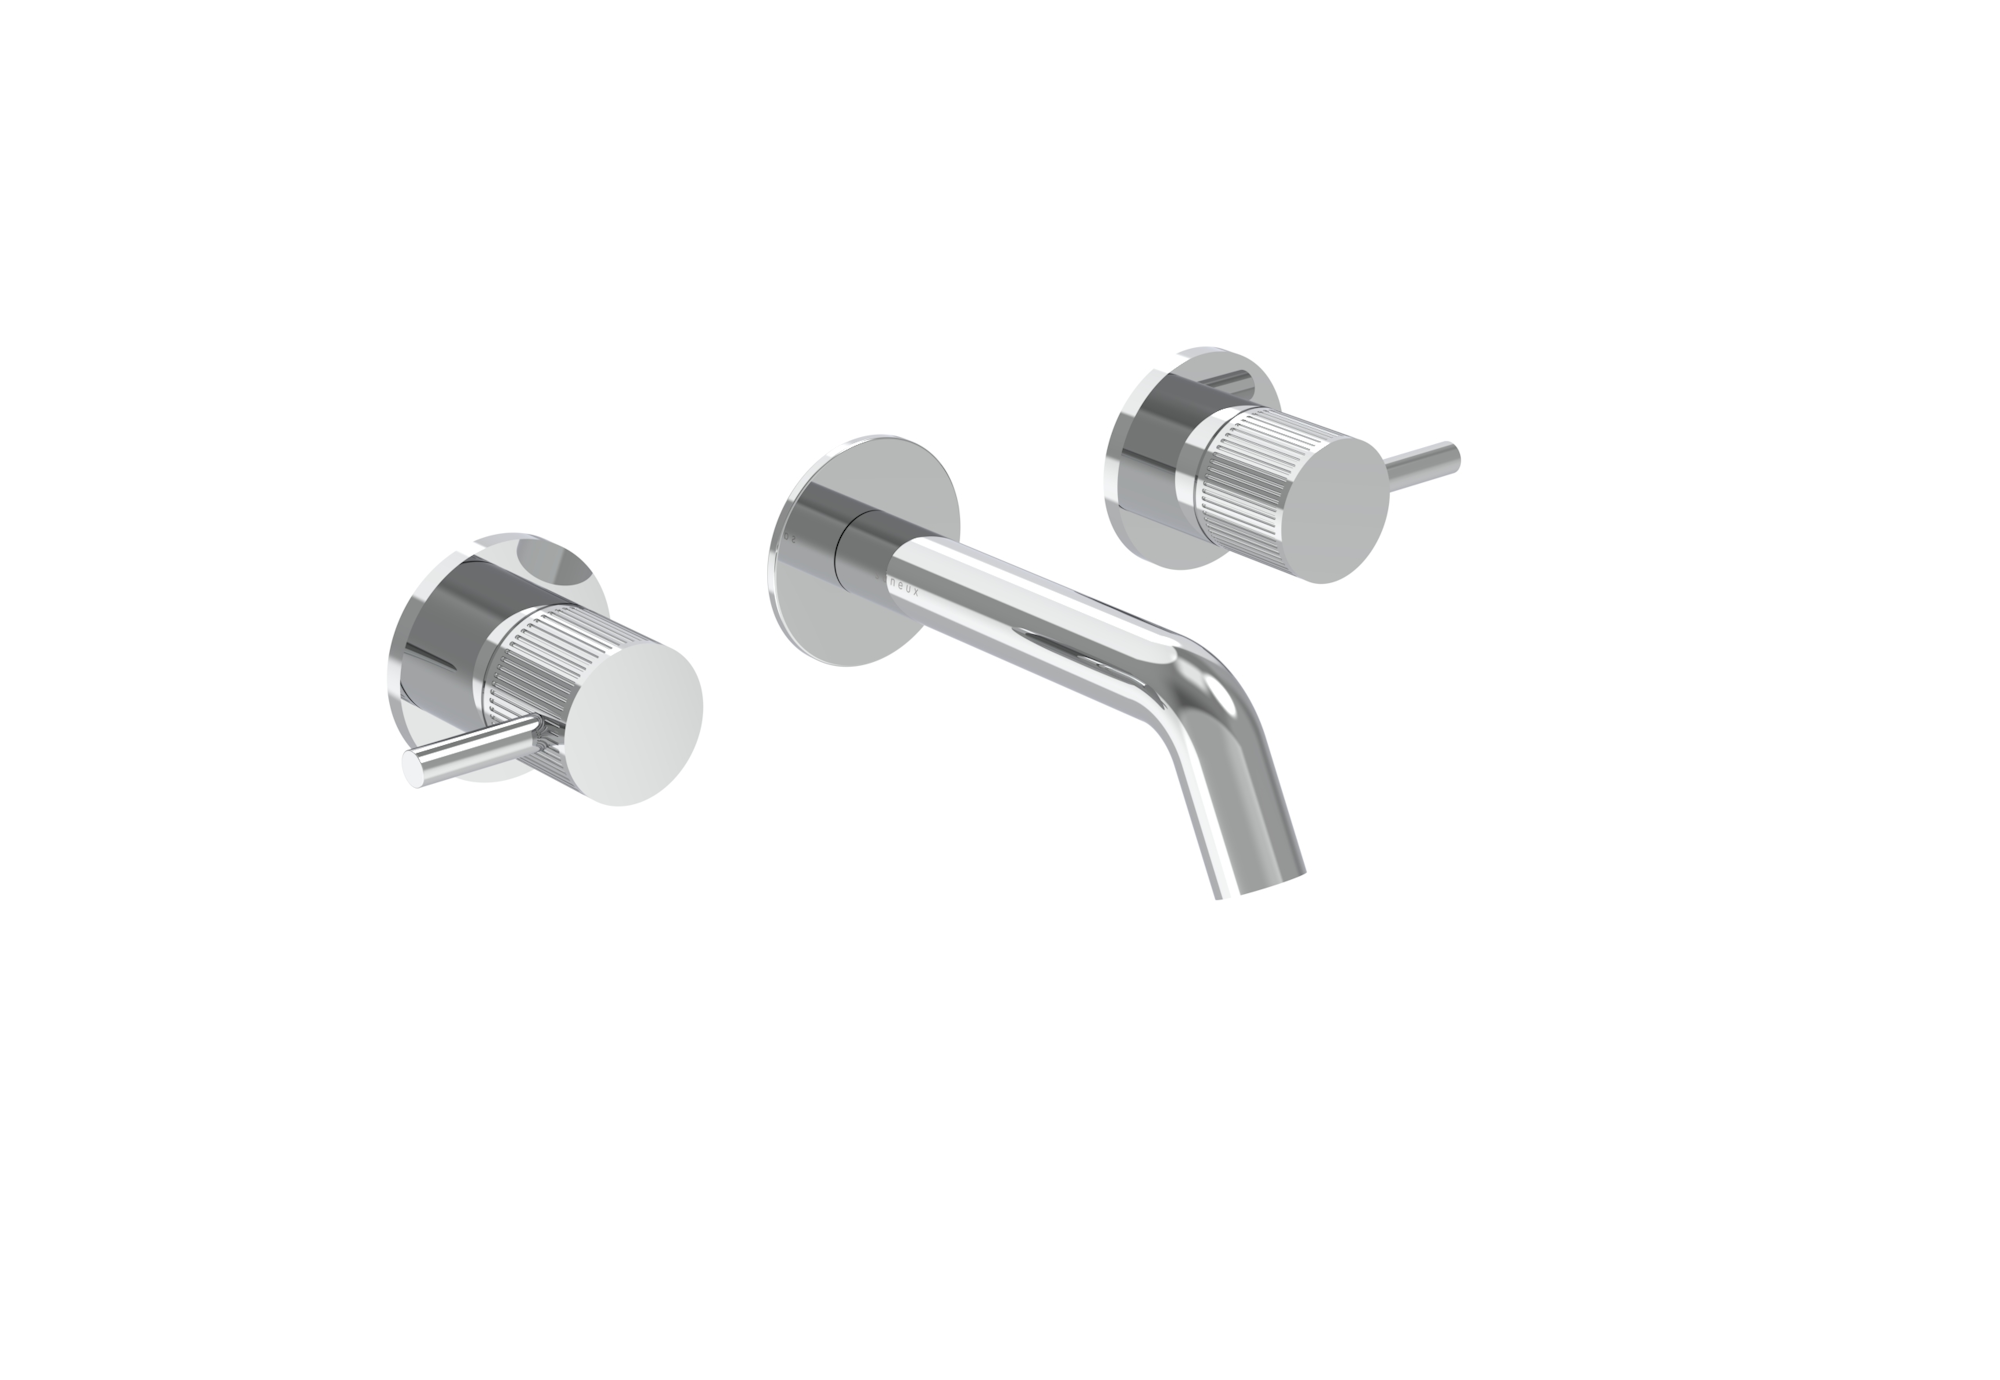 COS 3 Tap Hole Wall mounted KIT - w/ Short spout (130mm) w/ Fluted handle - Chrome